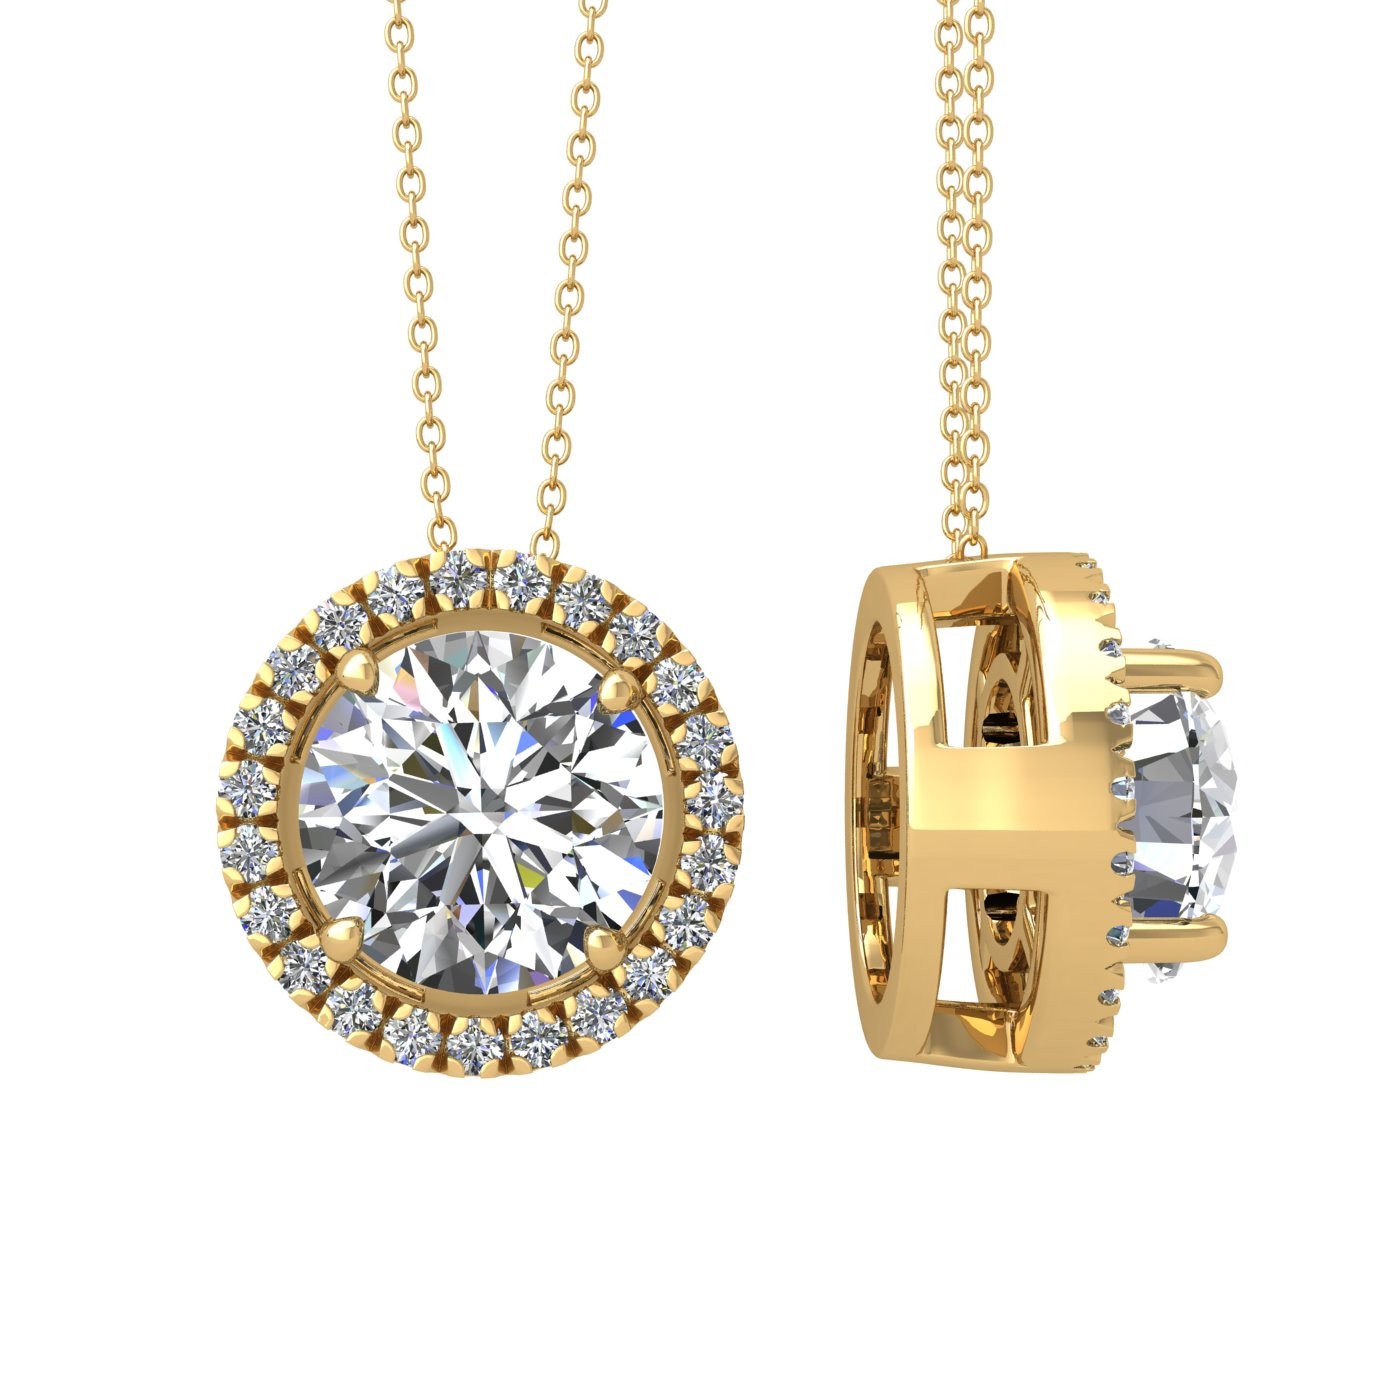 18k yellow gold 2 ct 4 prong round shape diamond pendant with diamond pavÉ set halo including chain seperate from the pendant Photos & images